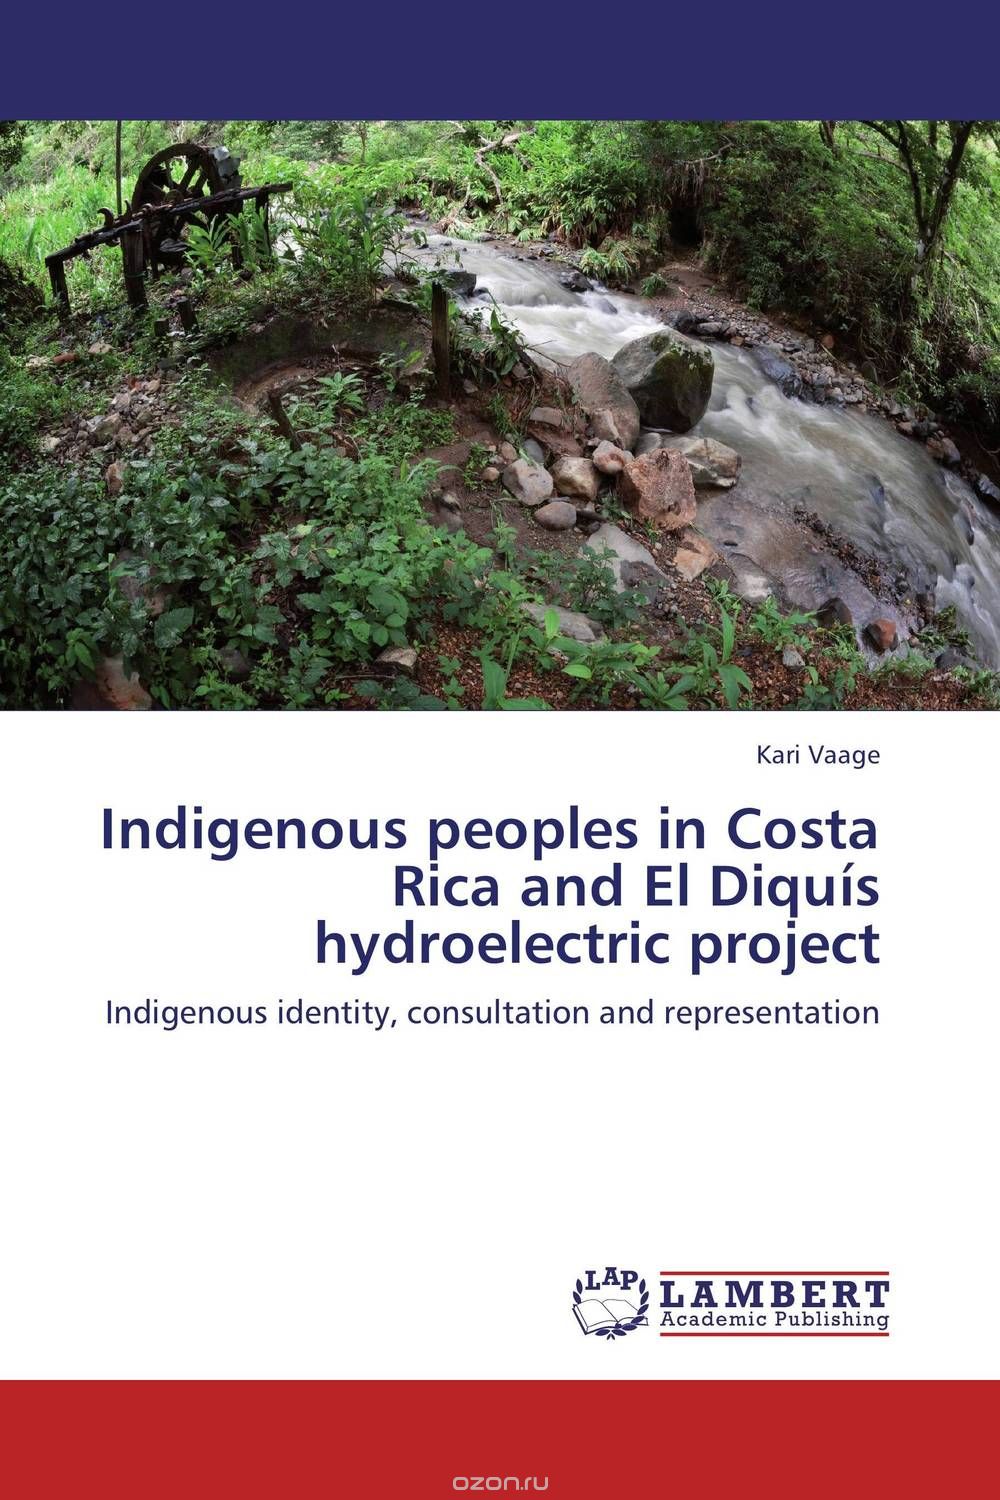 Скачать книгу "Indigenous peoples in Costa Rica and El Diquis hydroelectric project"